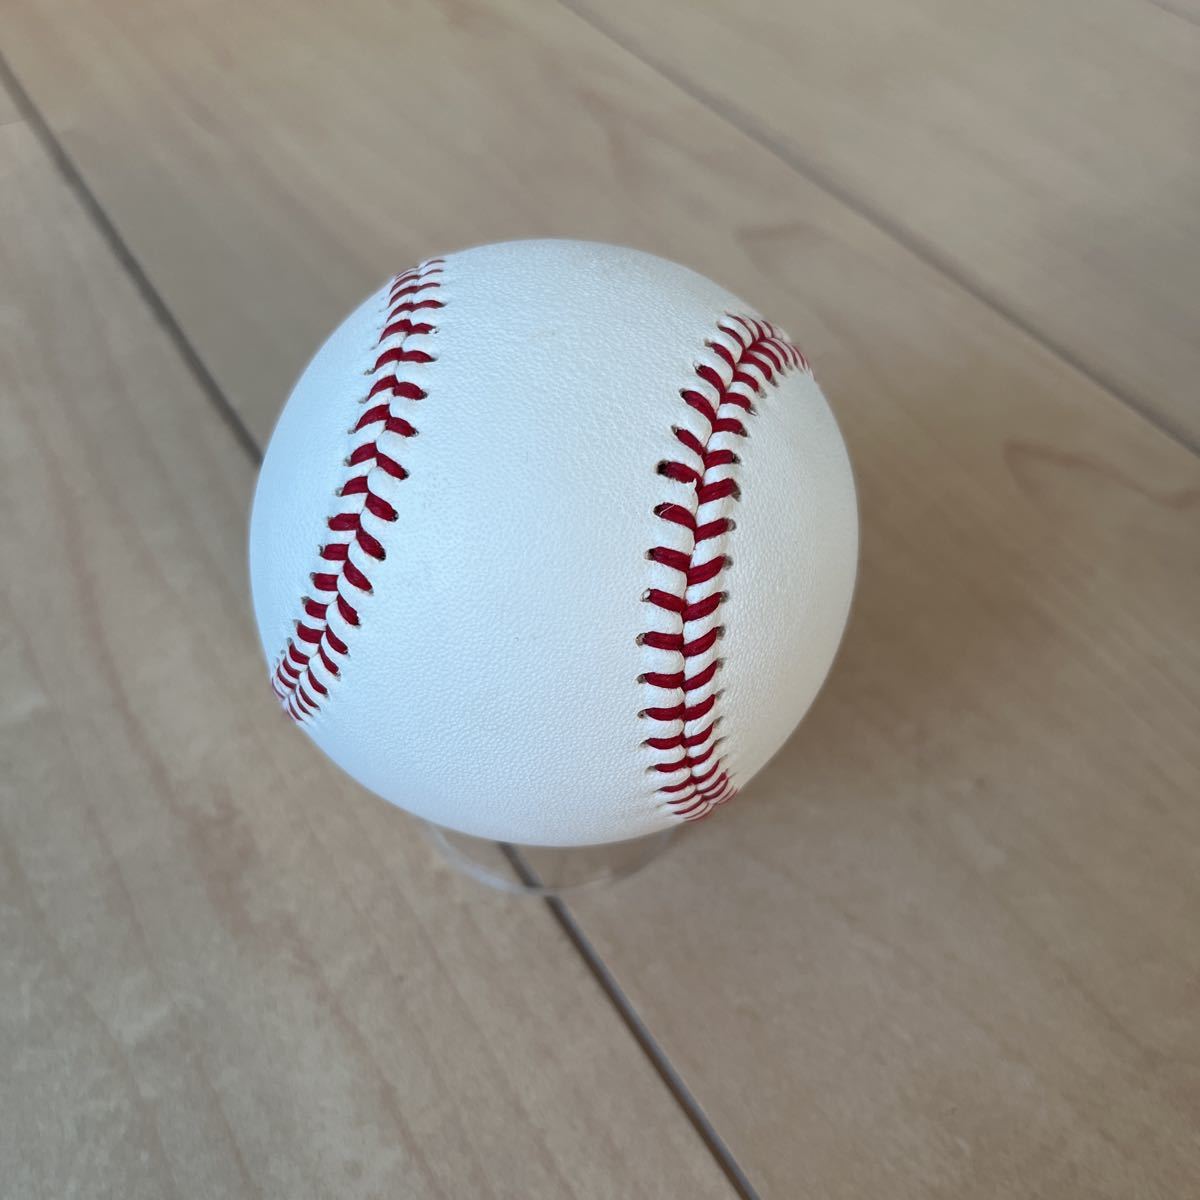 [ throwing included ] Tokyo Yomiuri Giants increase rice field large shining player autograph autograph ball not for sale . person army ( soft ball ) * rearing era. . number 015 ultra rare *